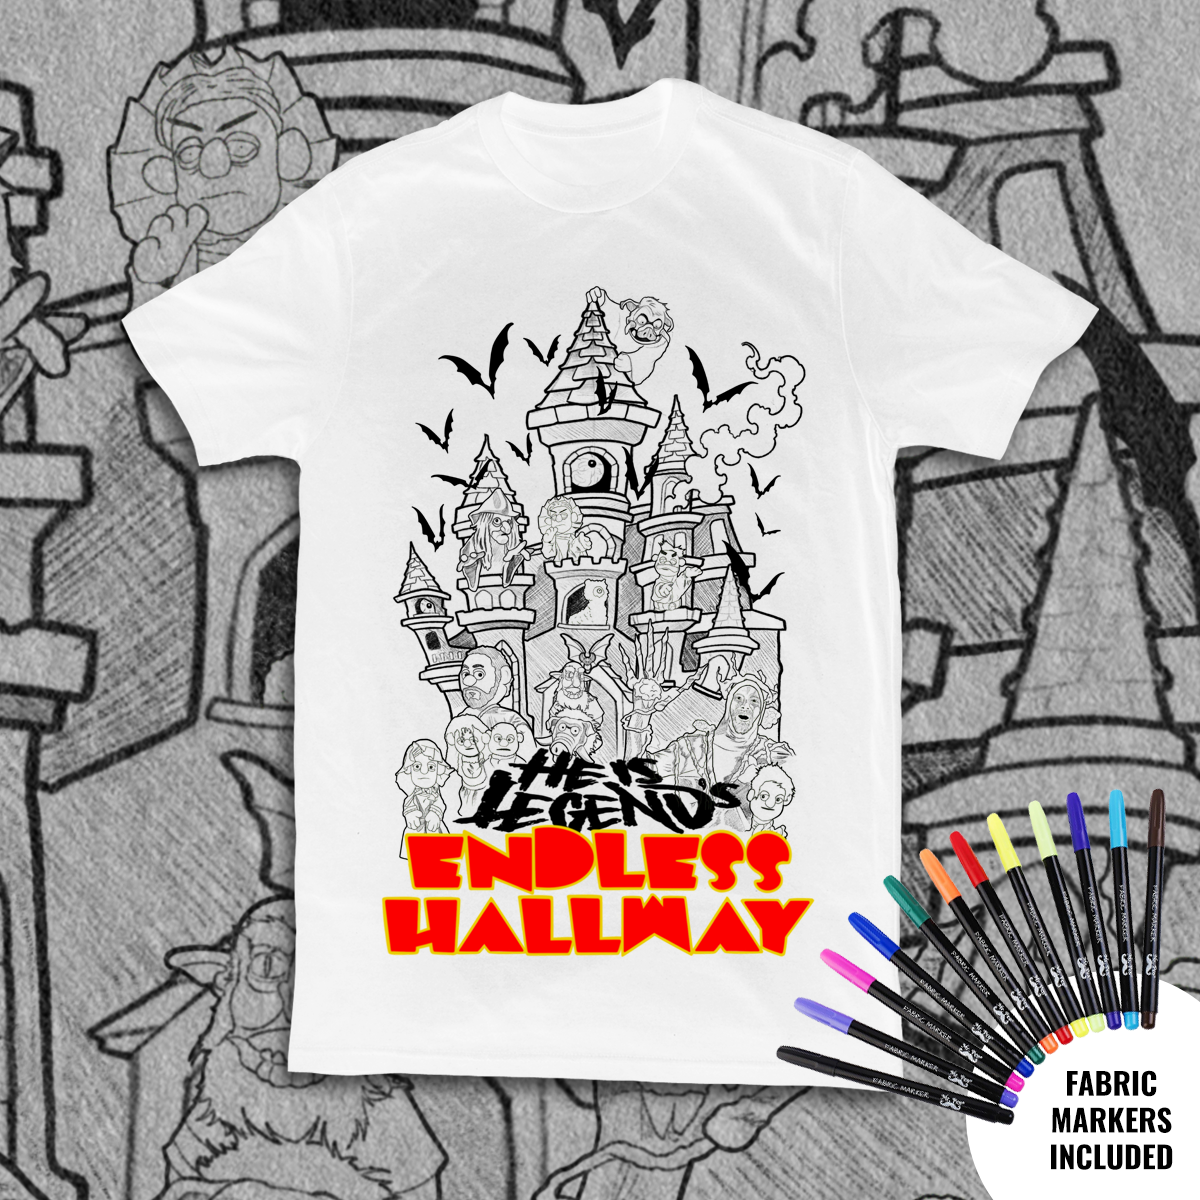 HE IS LEGEND "COLOR IT YOURSELF" SHIRT (PRE-ORDER)